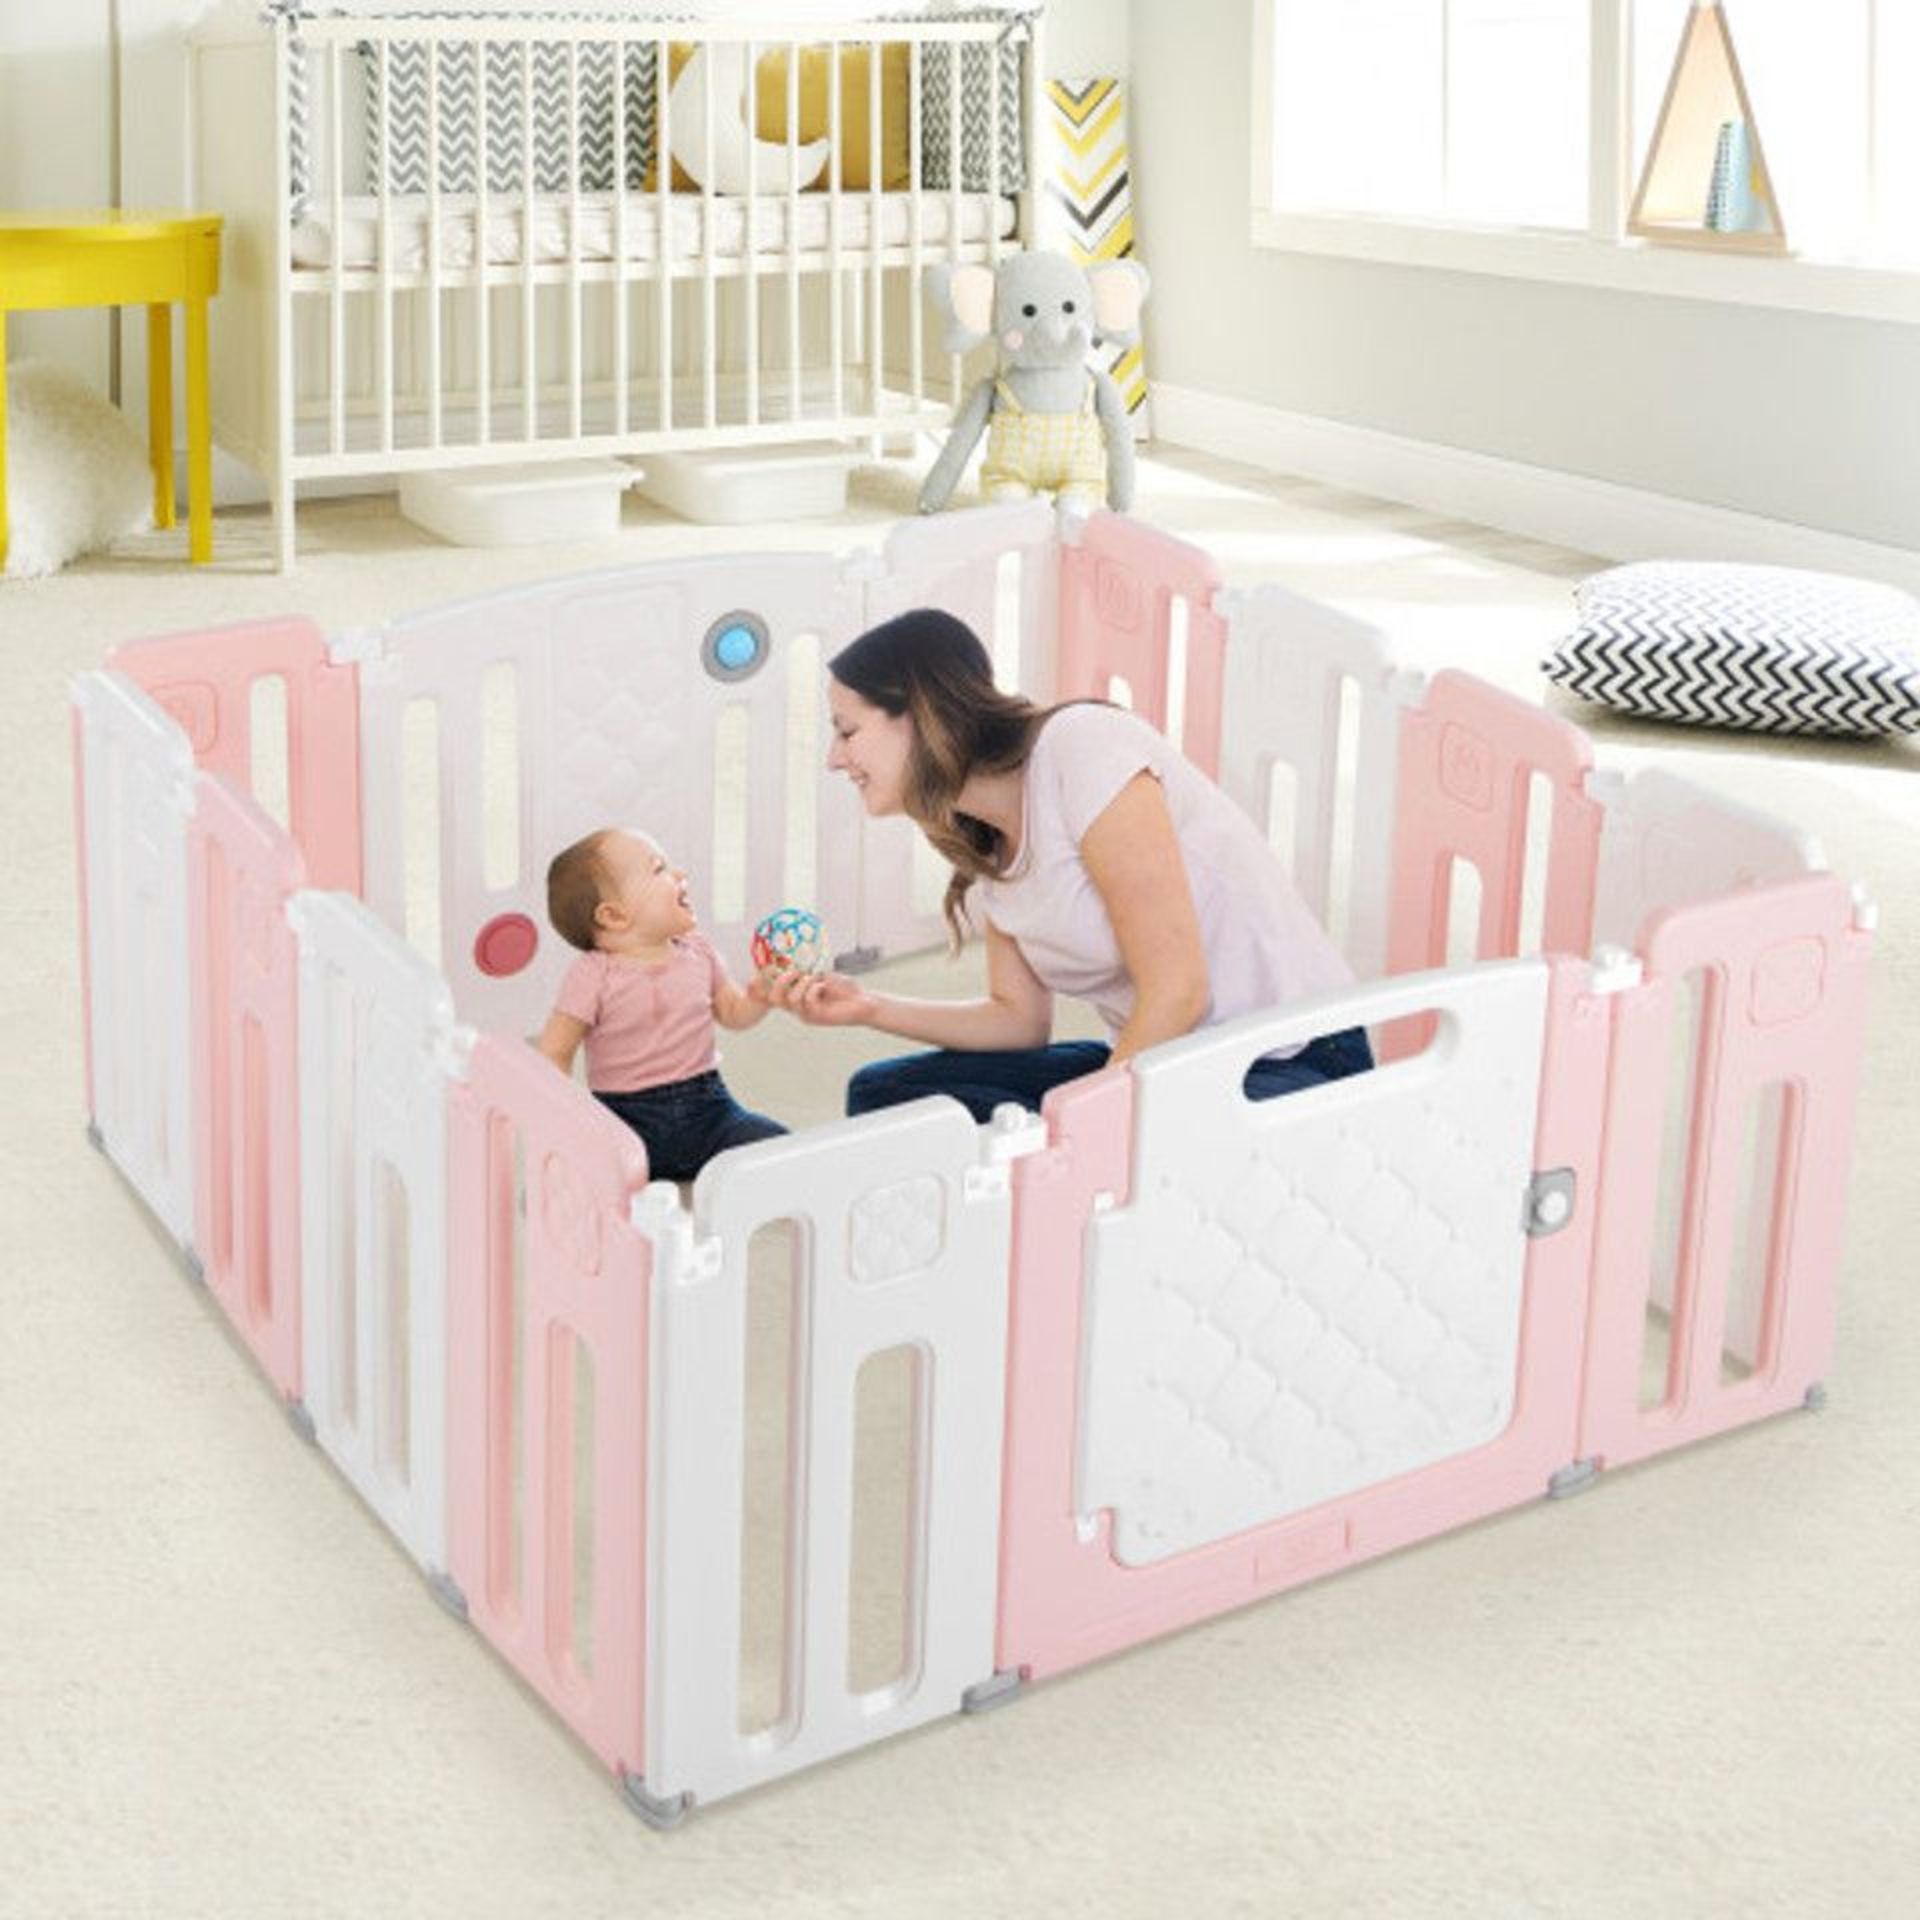 14 Panels Kids Safety Activity Play Center With Drawing Board-Pink. - ER25.